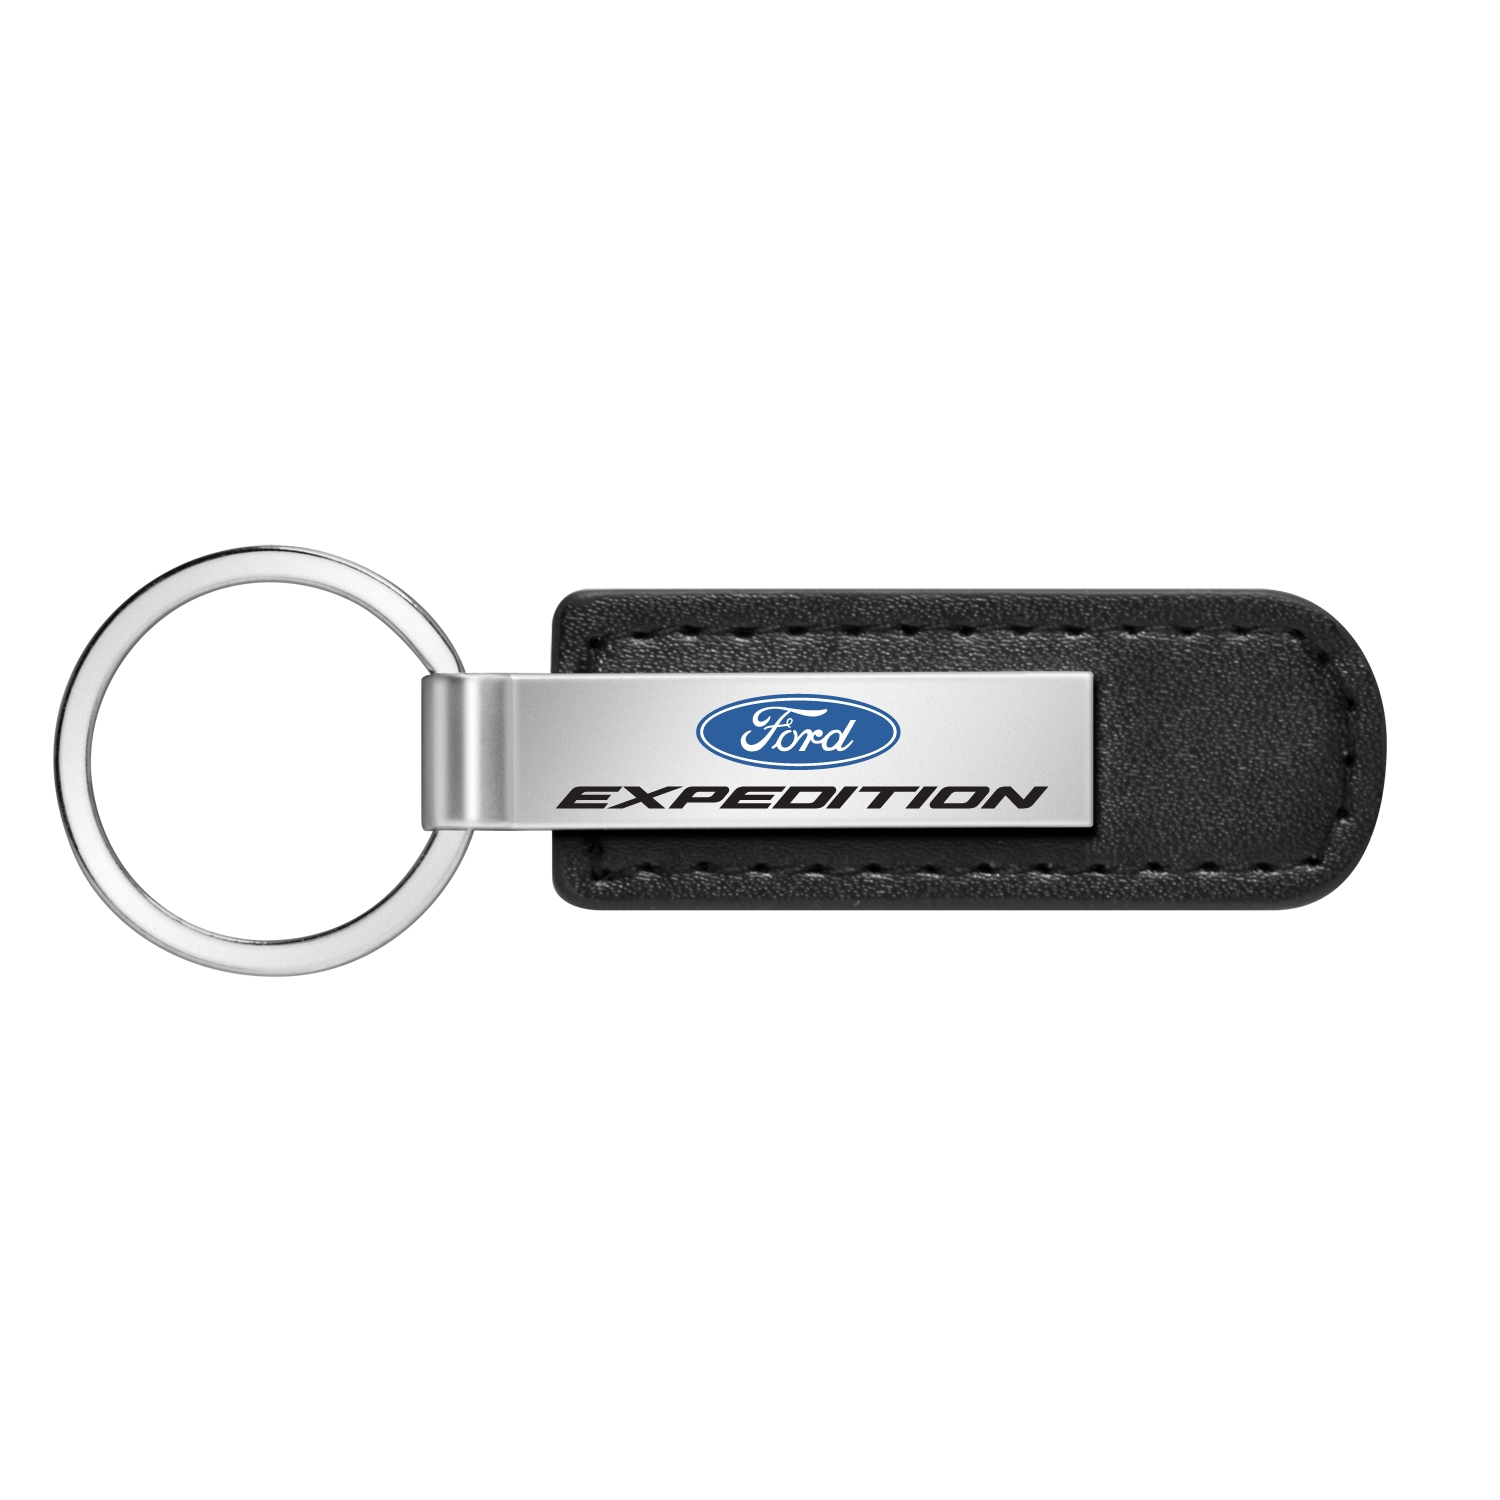 Ford Expedition Black Leather Strap Key Chain